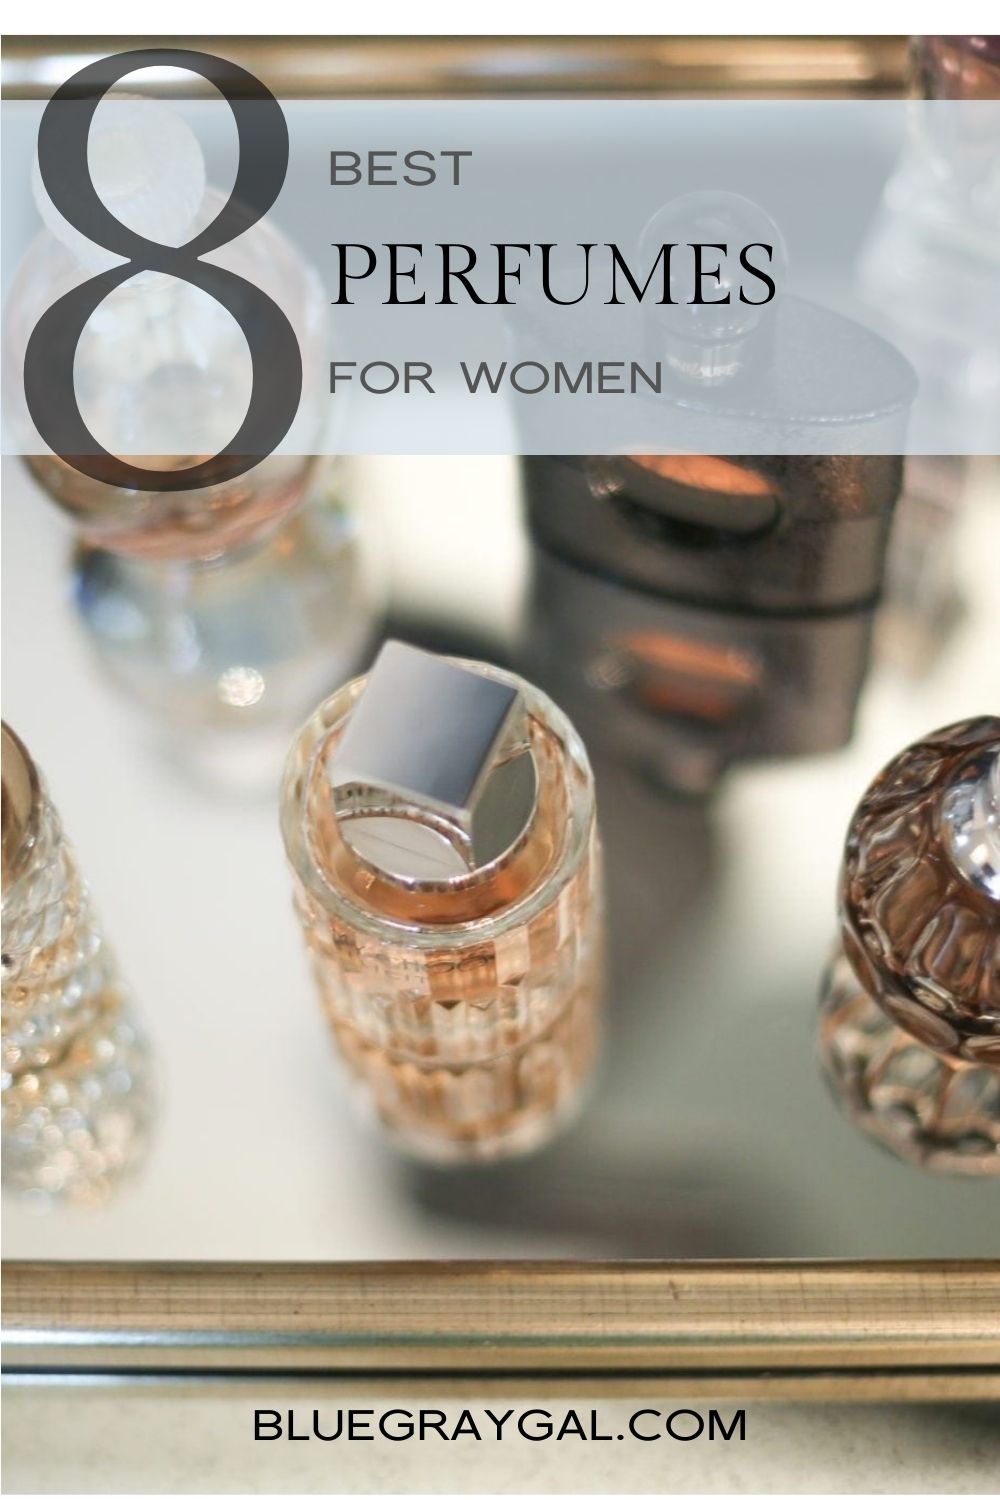 If you're looking for a beautiful new perfume for spring or summer, or a new hot date night perfume, then these are my top 8 perfumes I use for everyday fragrance or to wear out with my husband!